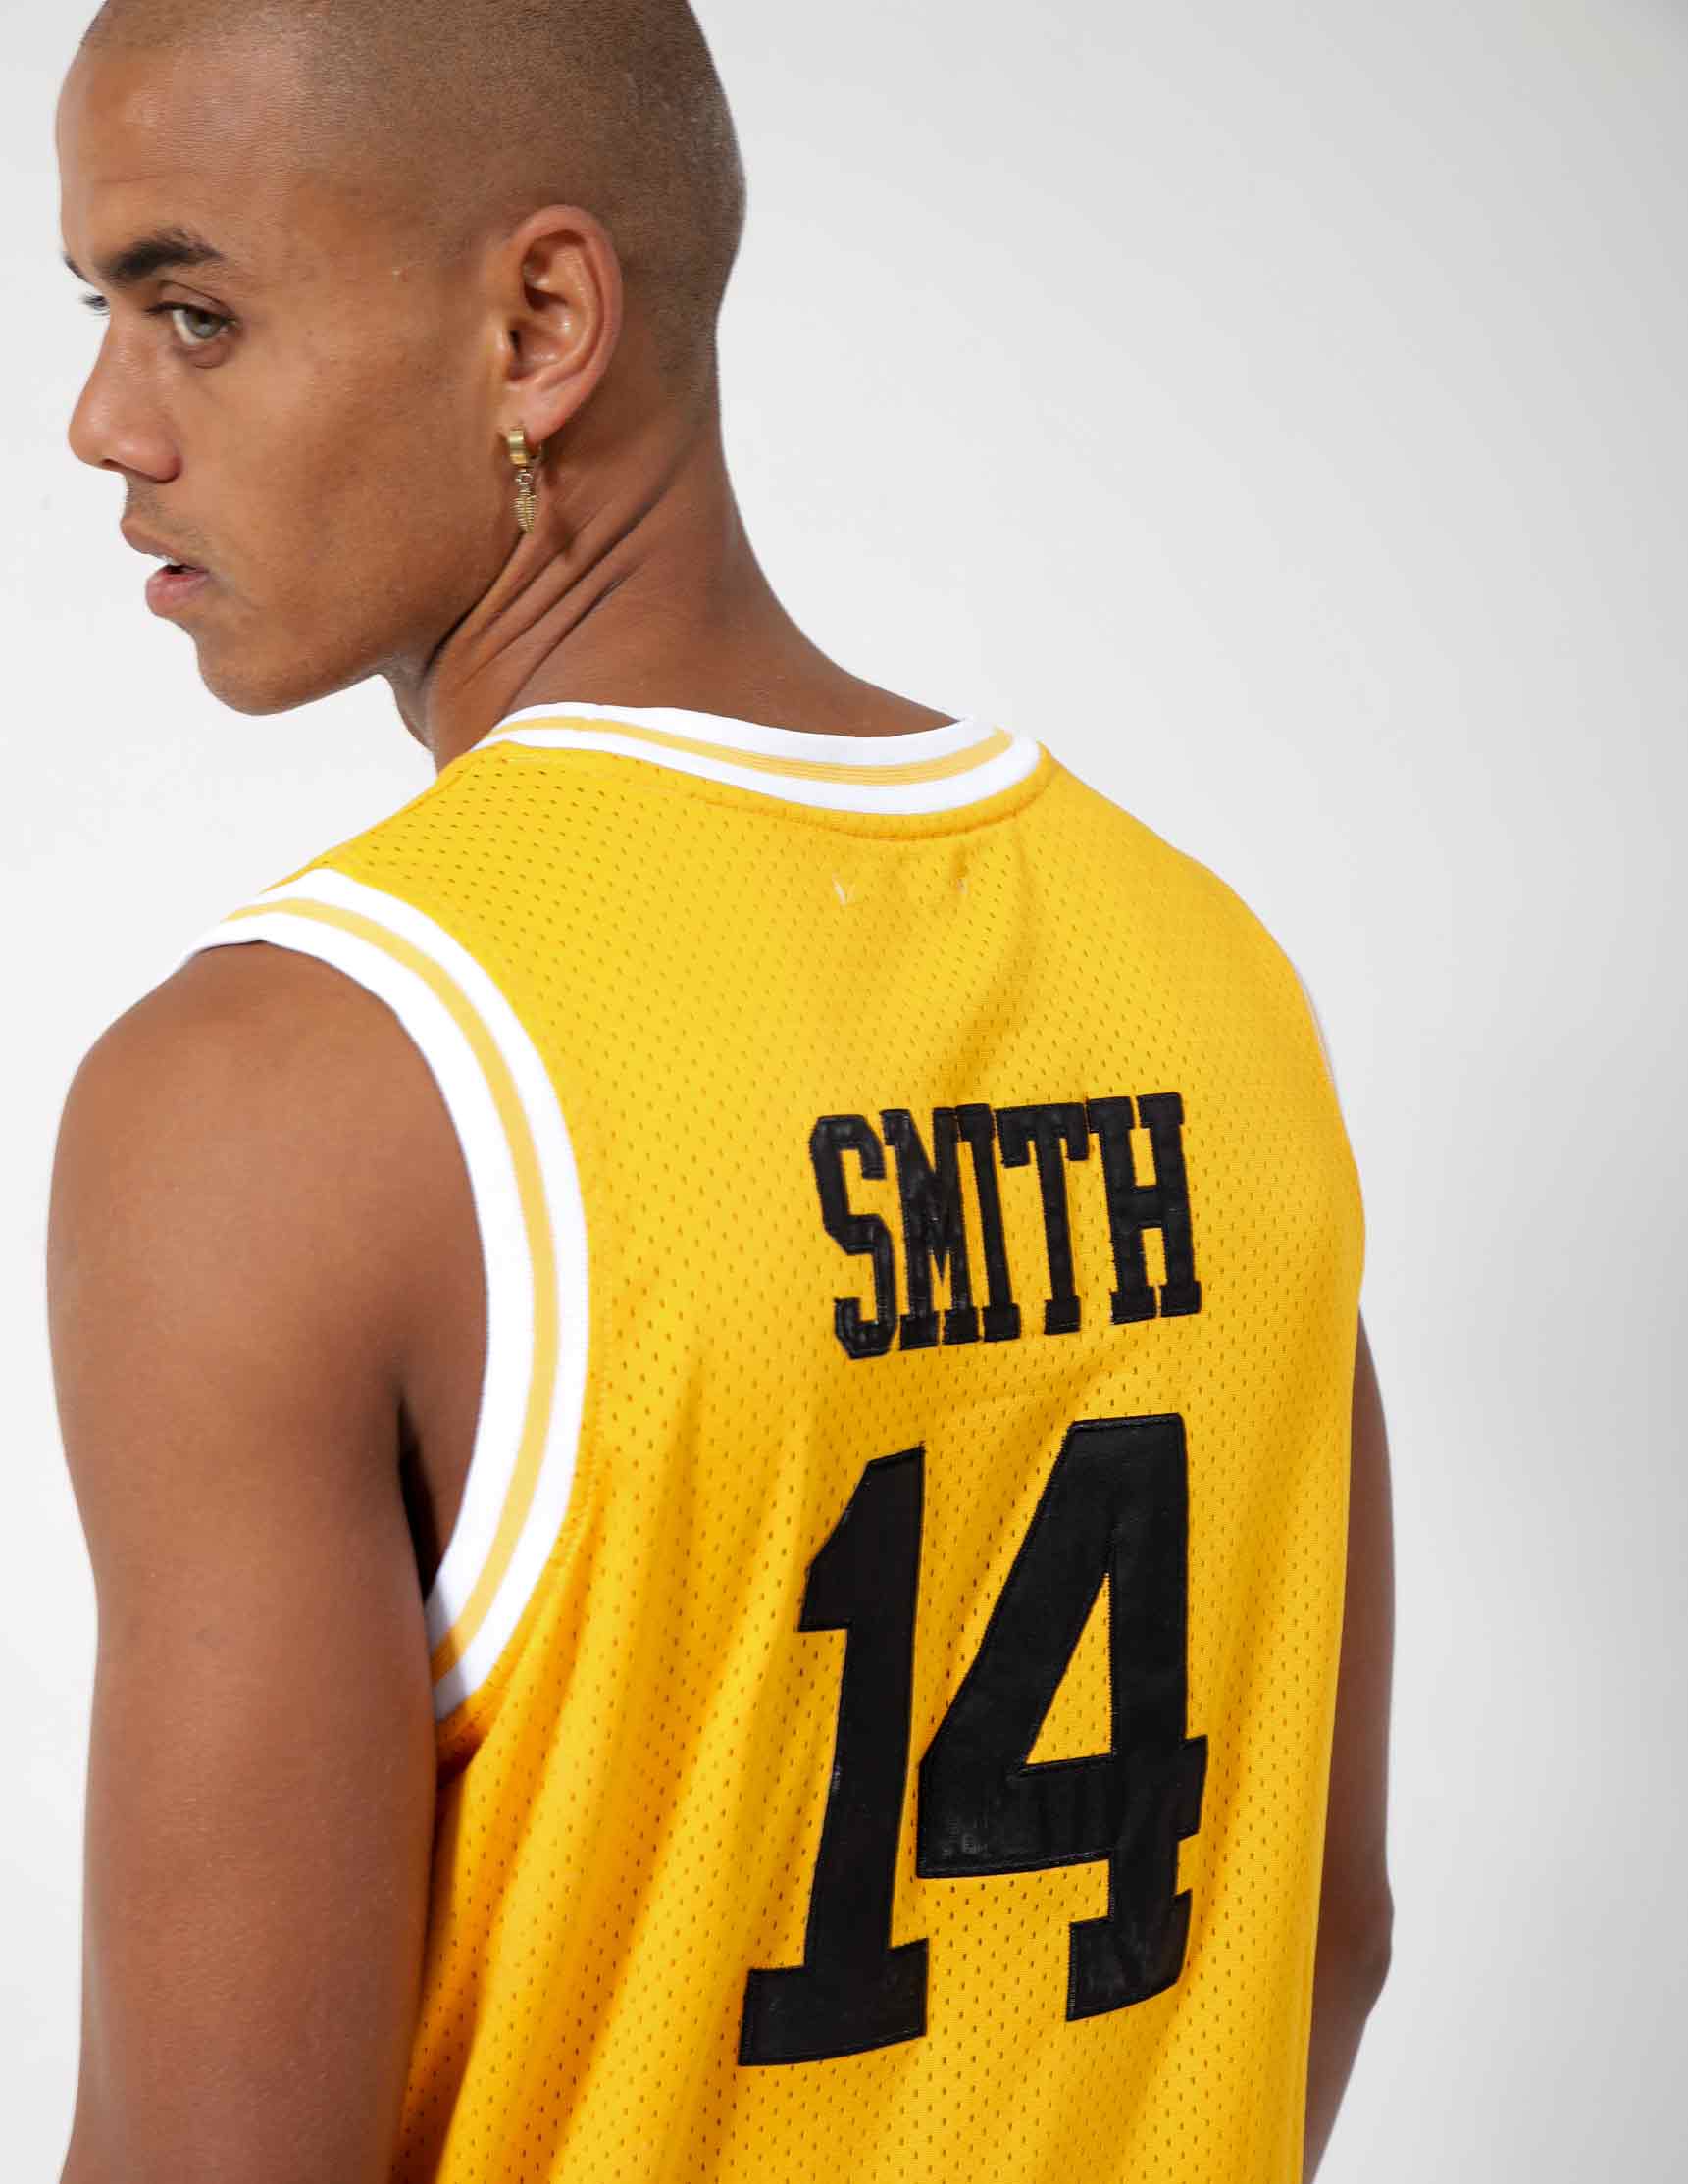 Will Smith Fresh Prince of Bel Air Academy Jersey  Fresh prince of bel air,  Bel air academy, Prince of bel air